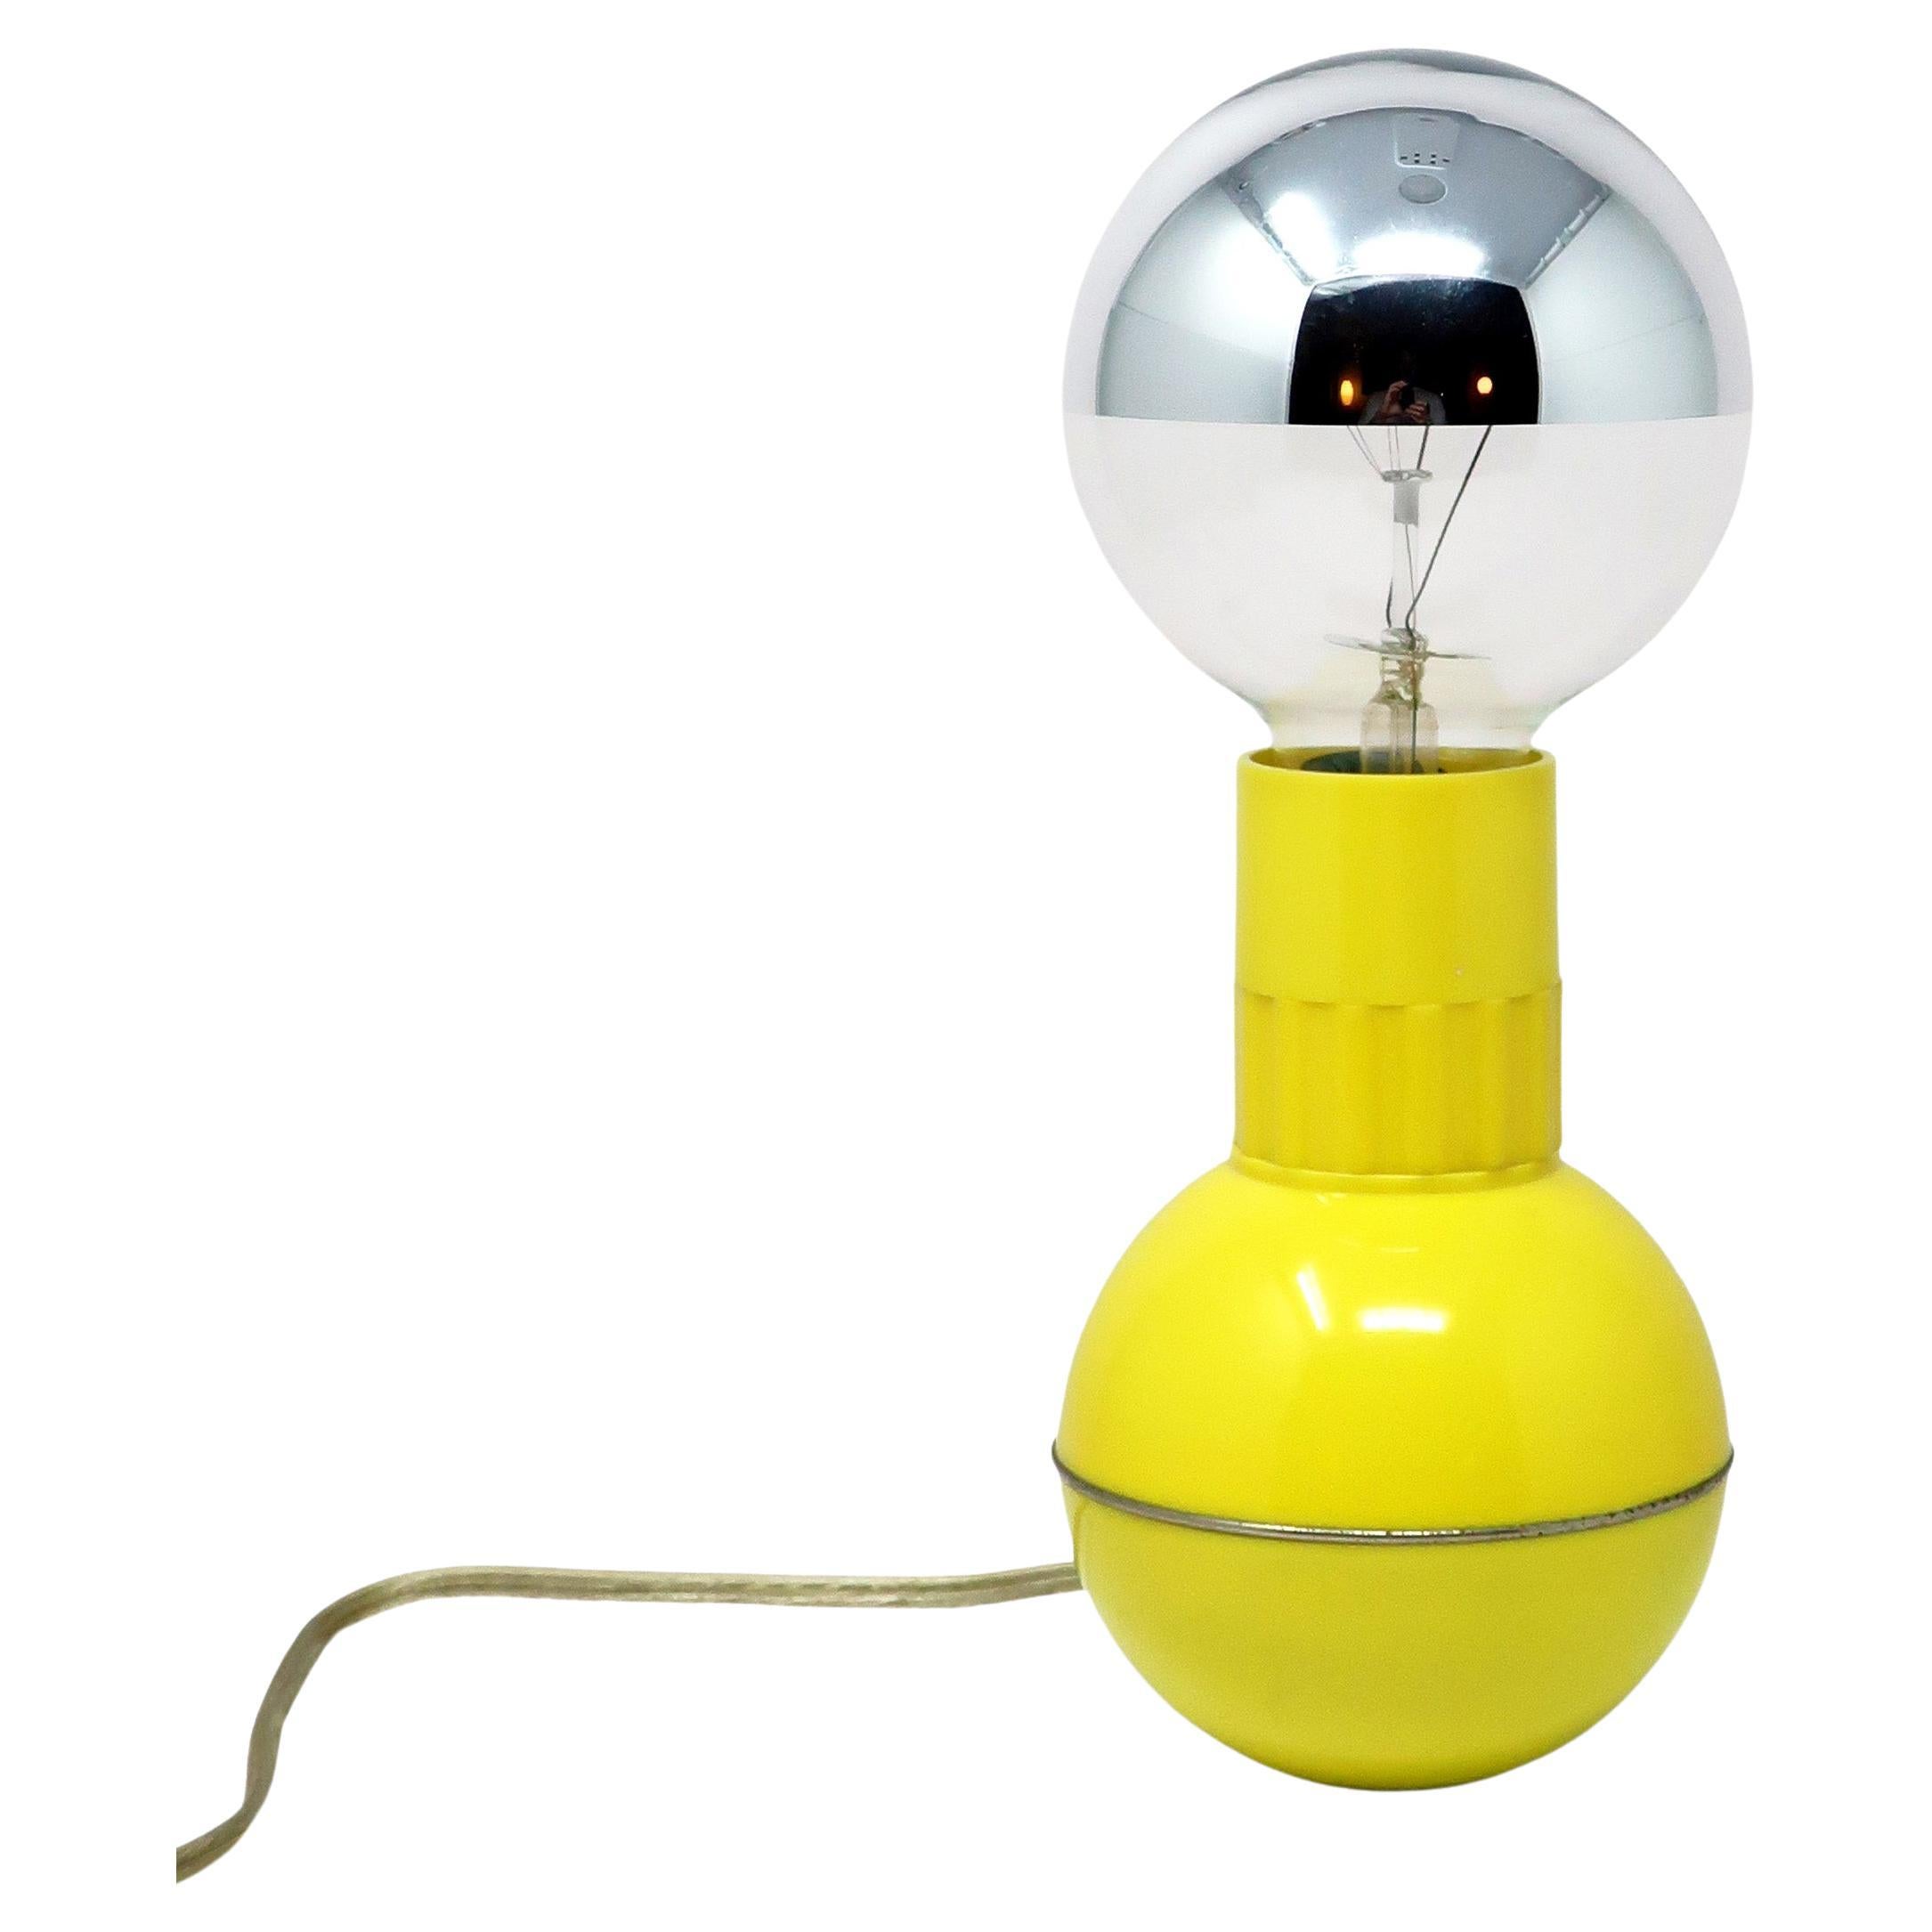 A classic by famed Italian design Enzo Mari that looks like a dumbbell.  Spherical weighted base with chrome ring keeps the lamp from tipping over, yellow ribbed collar turns on/off and dims the light, and half-dipped chrome bulb gives it a diffuse